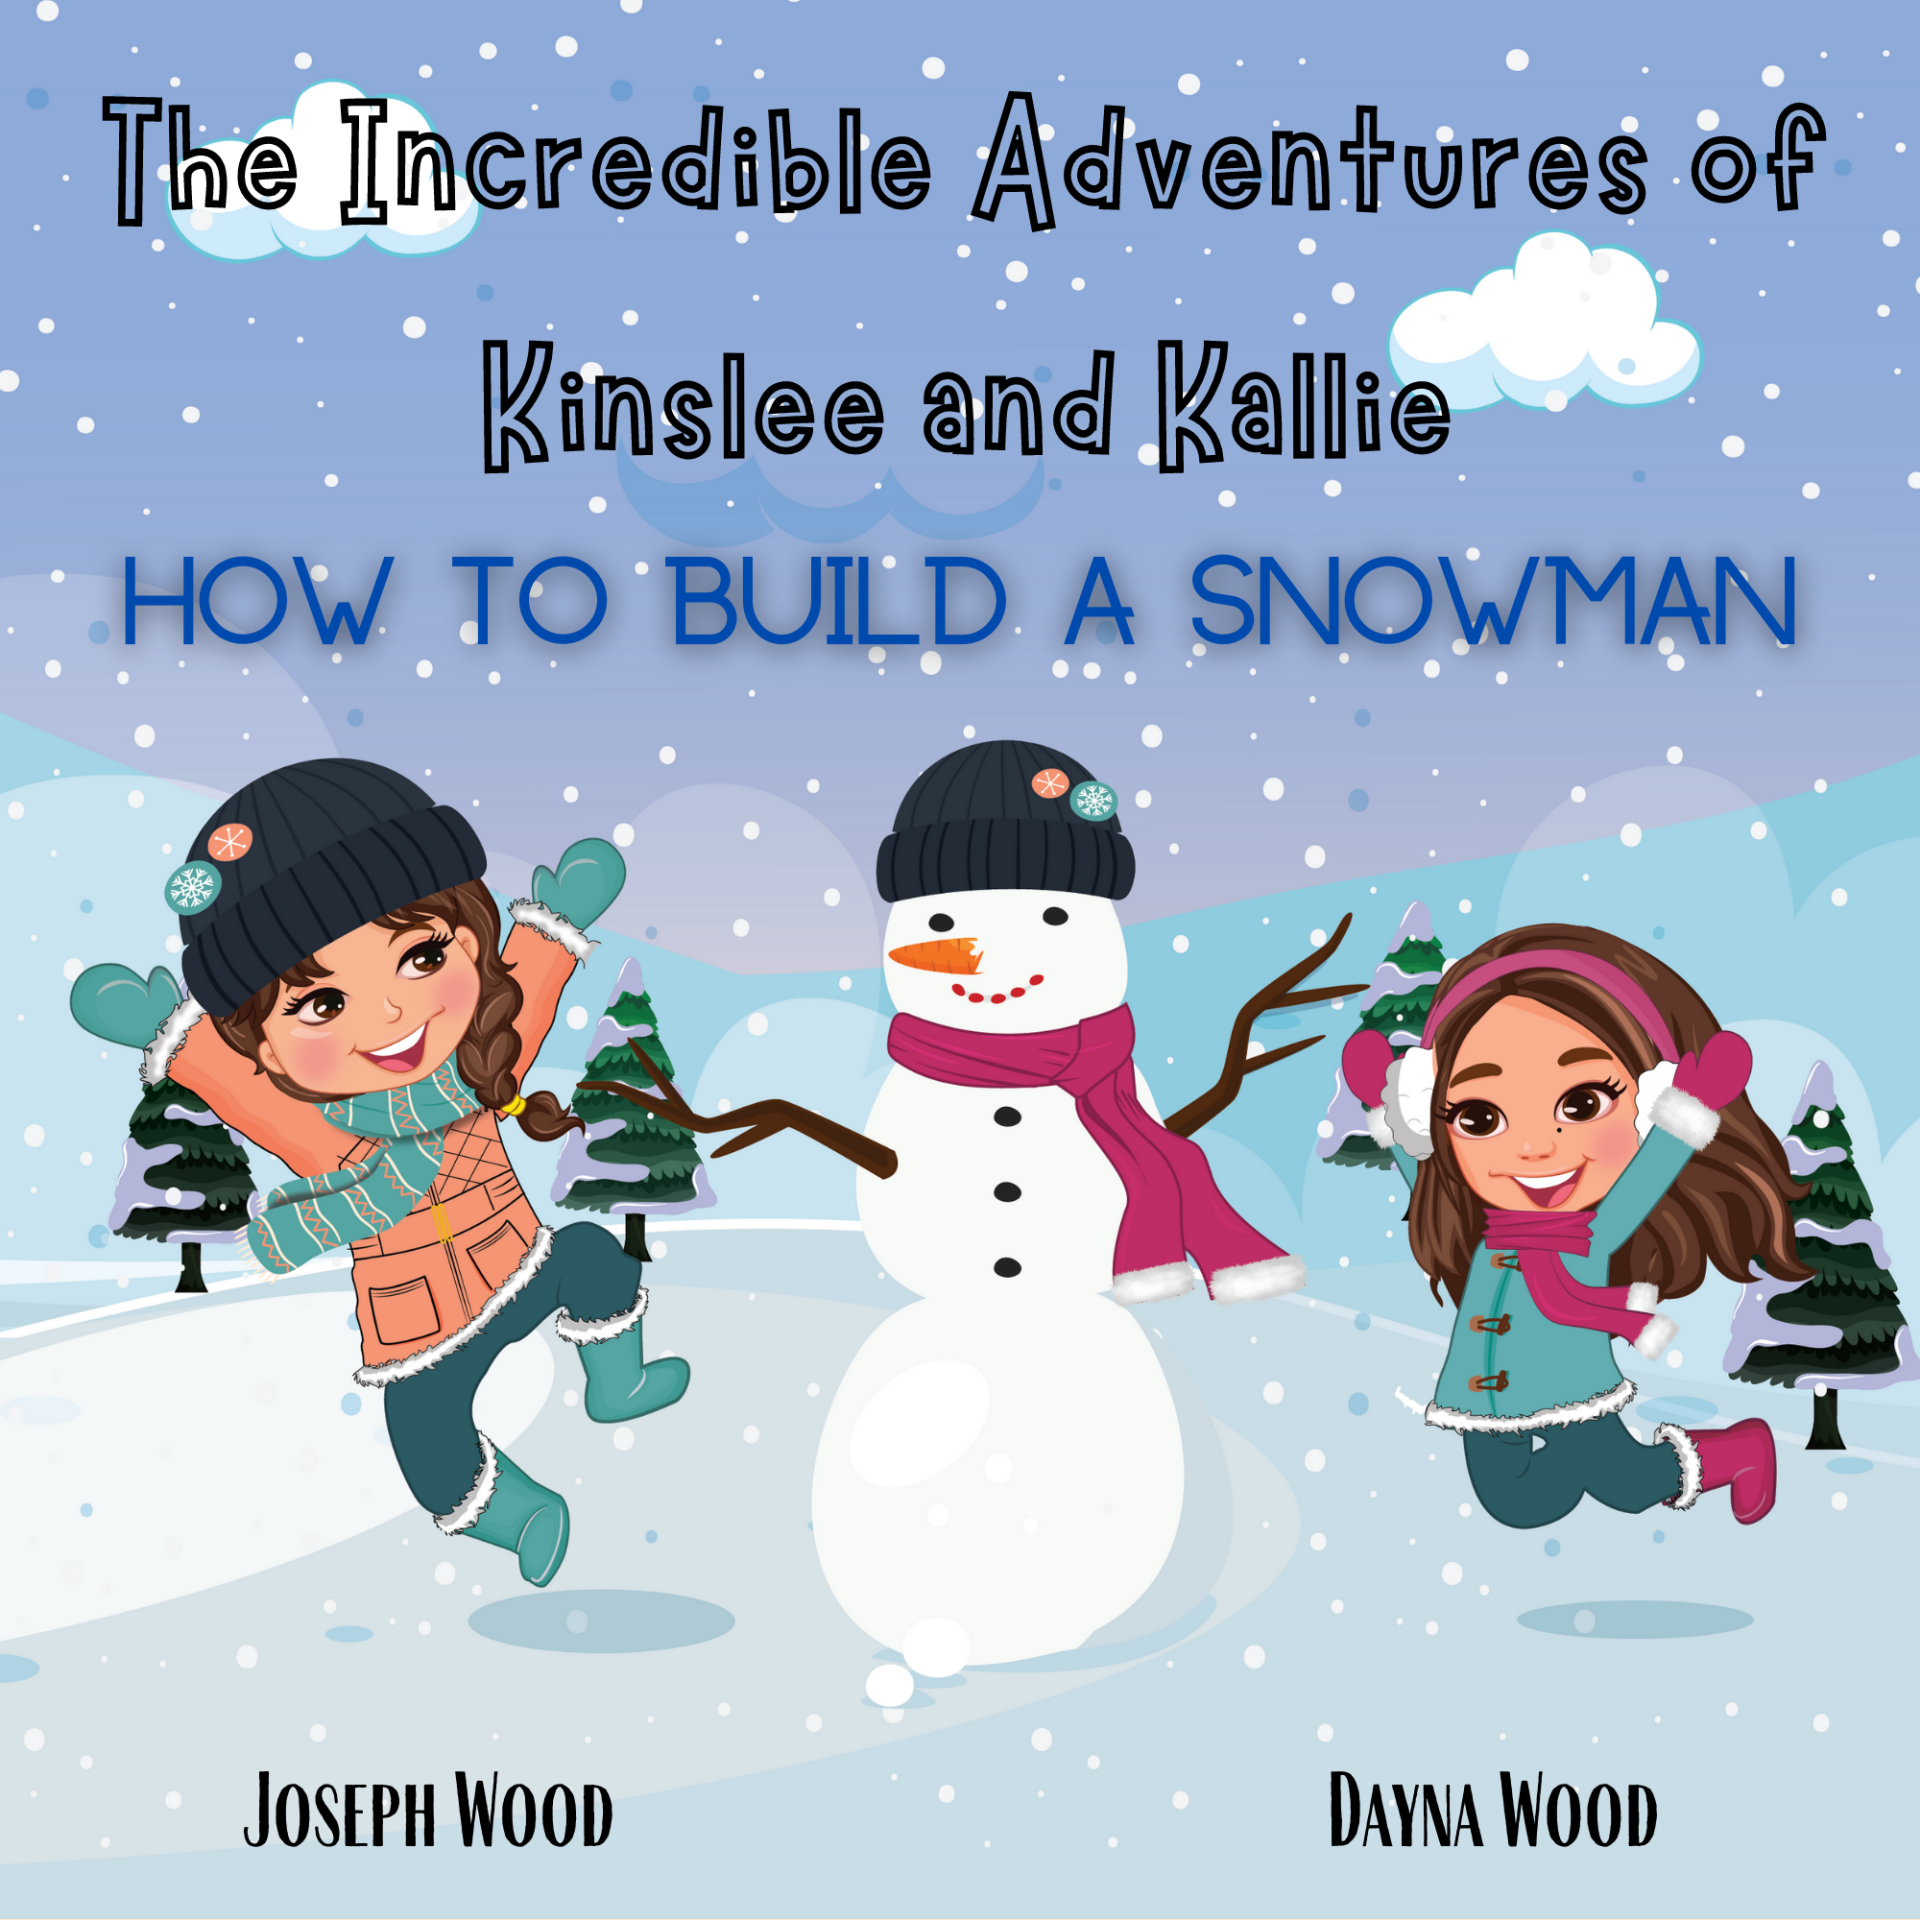 FREE: The Incredible Adventures of Kinslee and Kallie: How to Build a Snowman by Joseph Wood